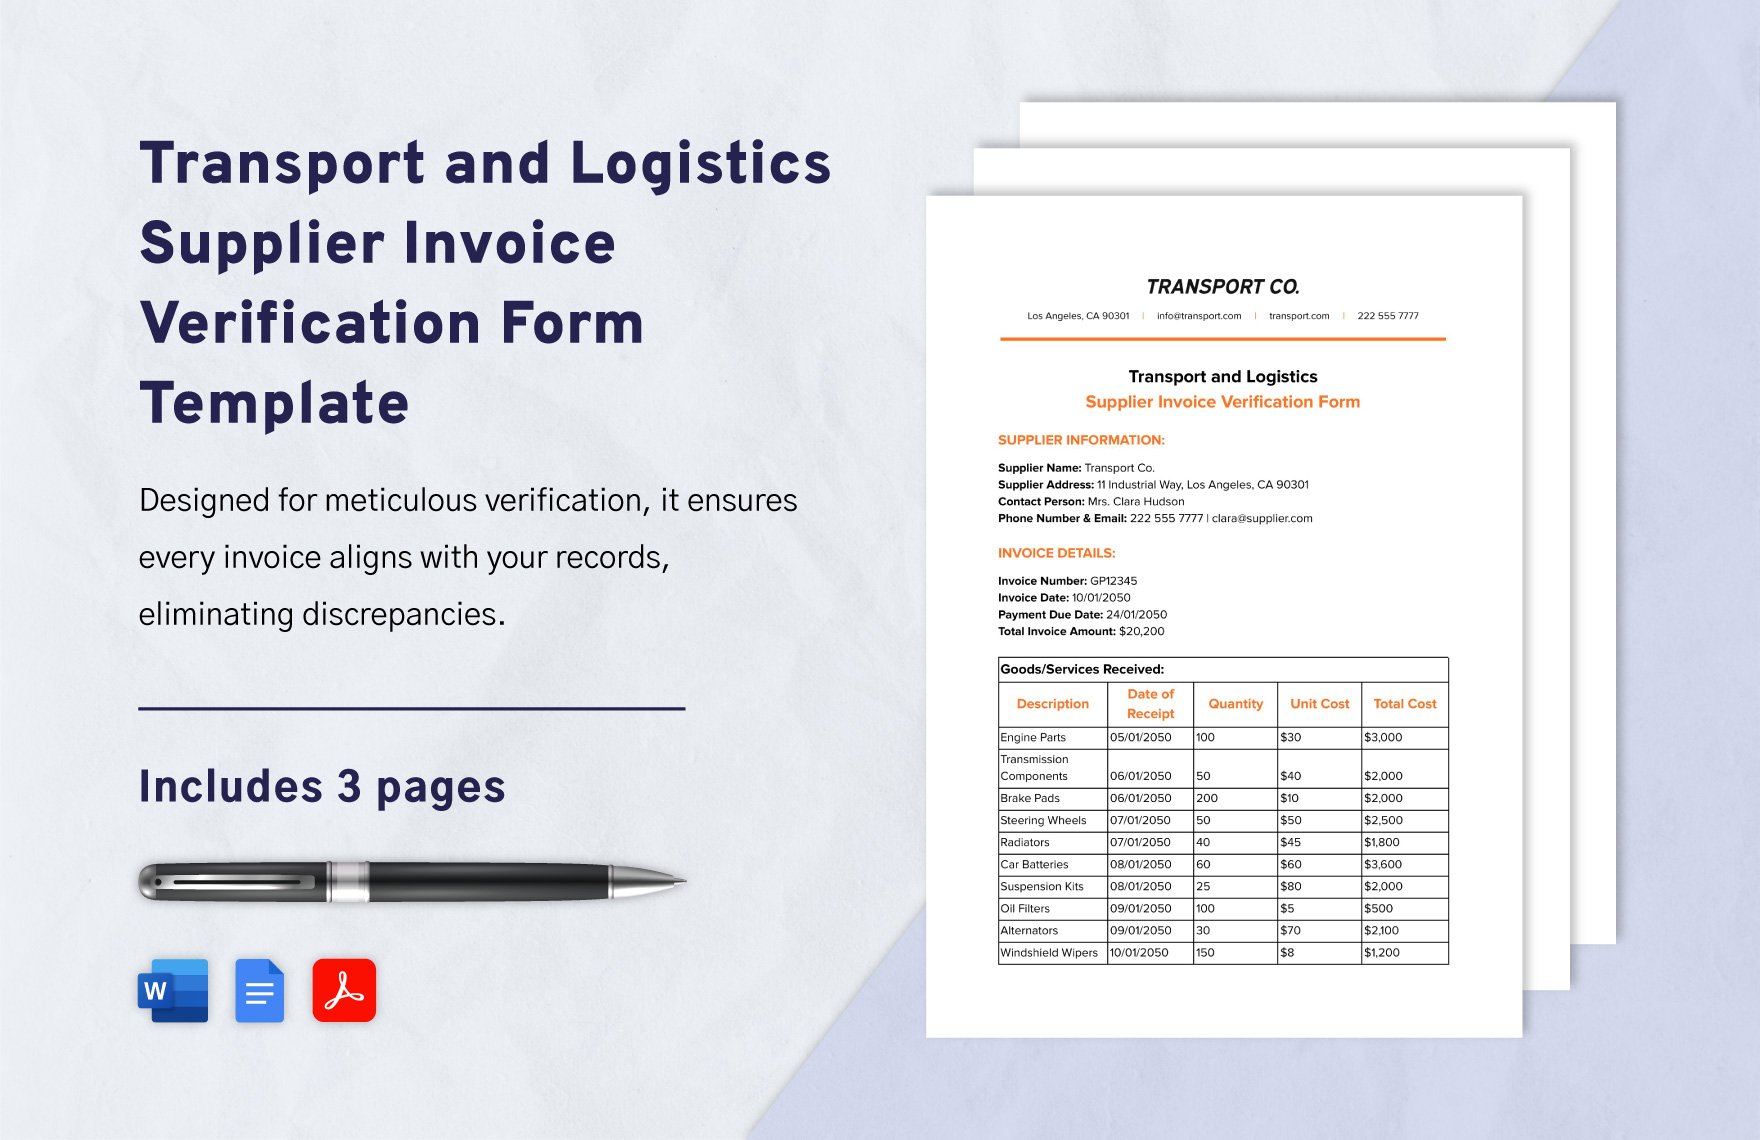 Transport and Logistics Supplier Invoice Verification Form Template